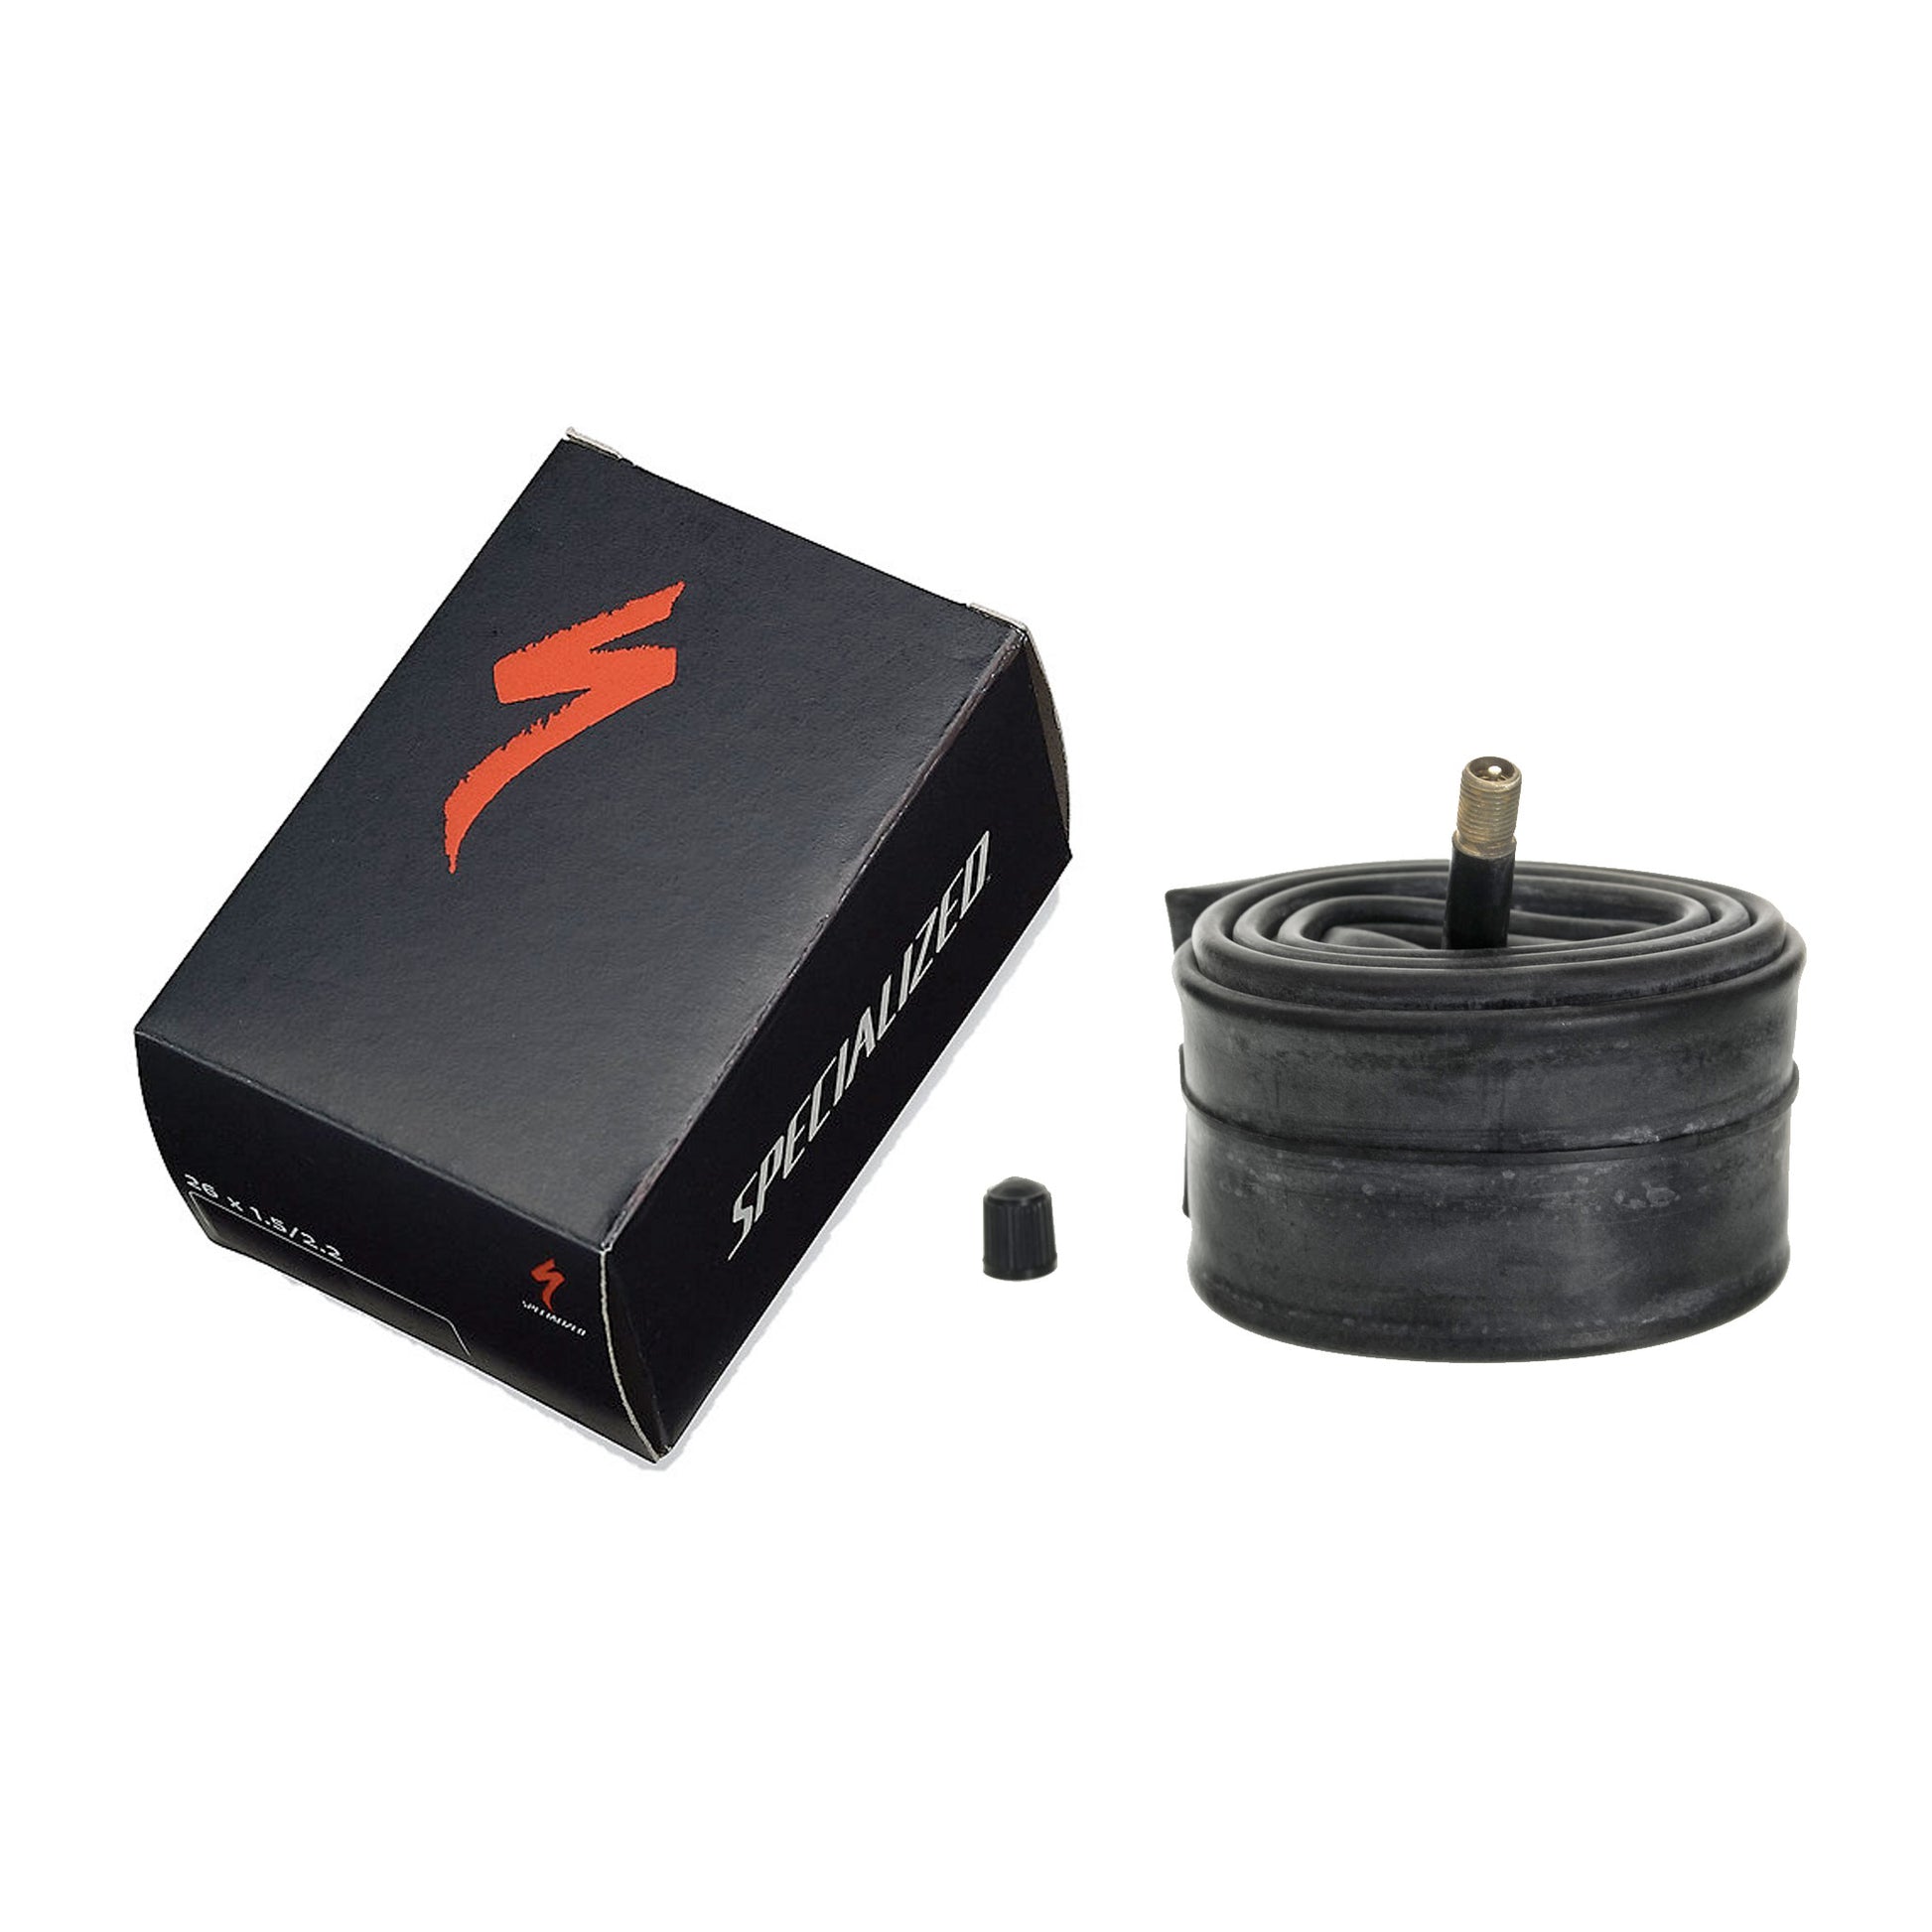 Specialized Schrader Valve Bicycle Inner Tube 16" x 1.5-2.2" buy at Woolys Wheels Sydney